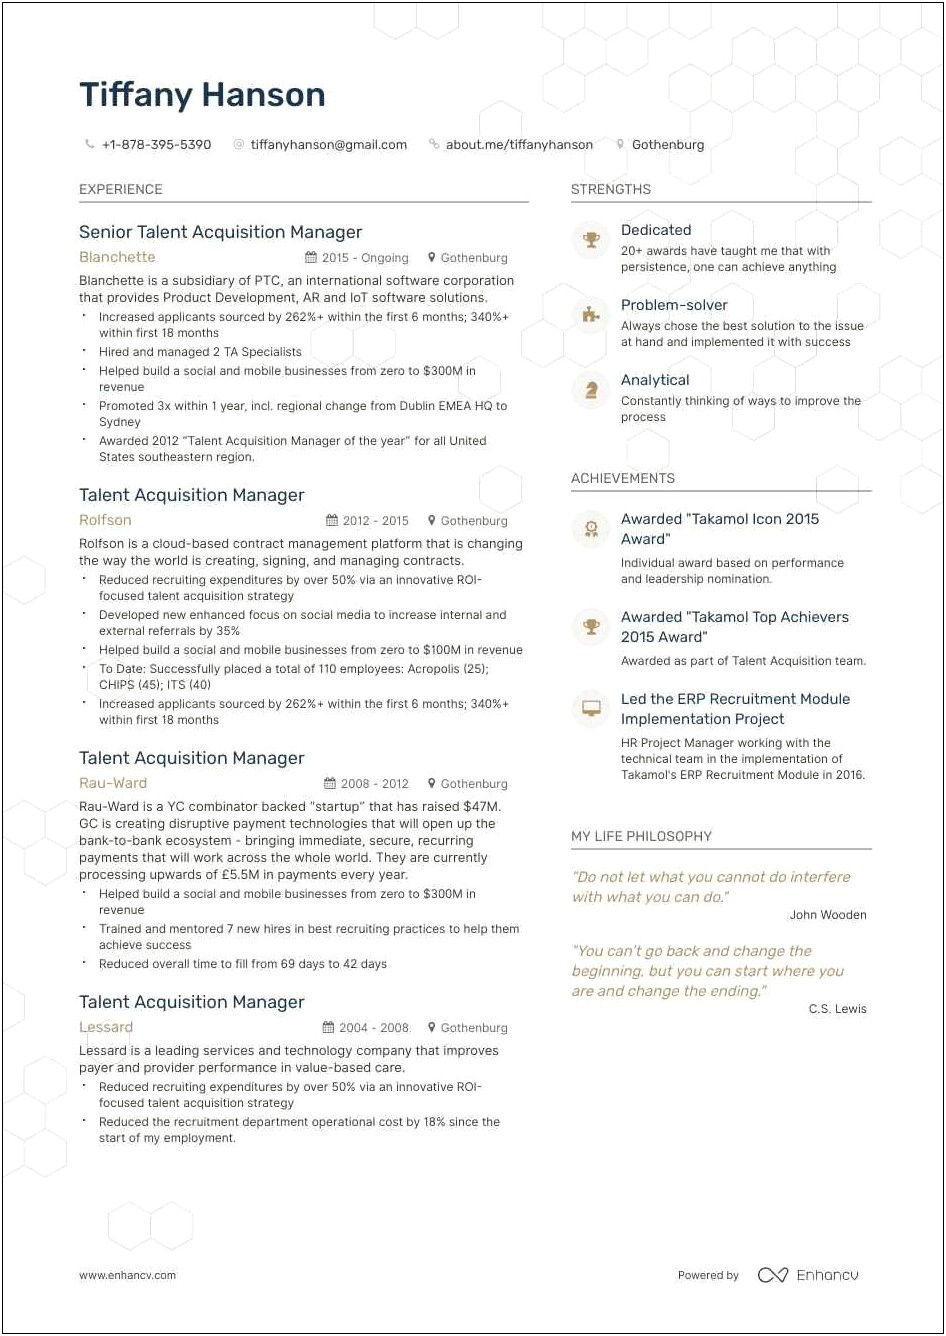 Talent Aquistion Manager Resume Summary